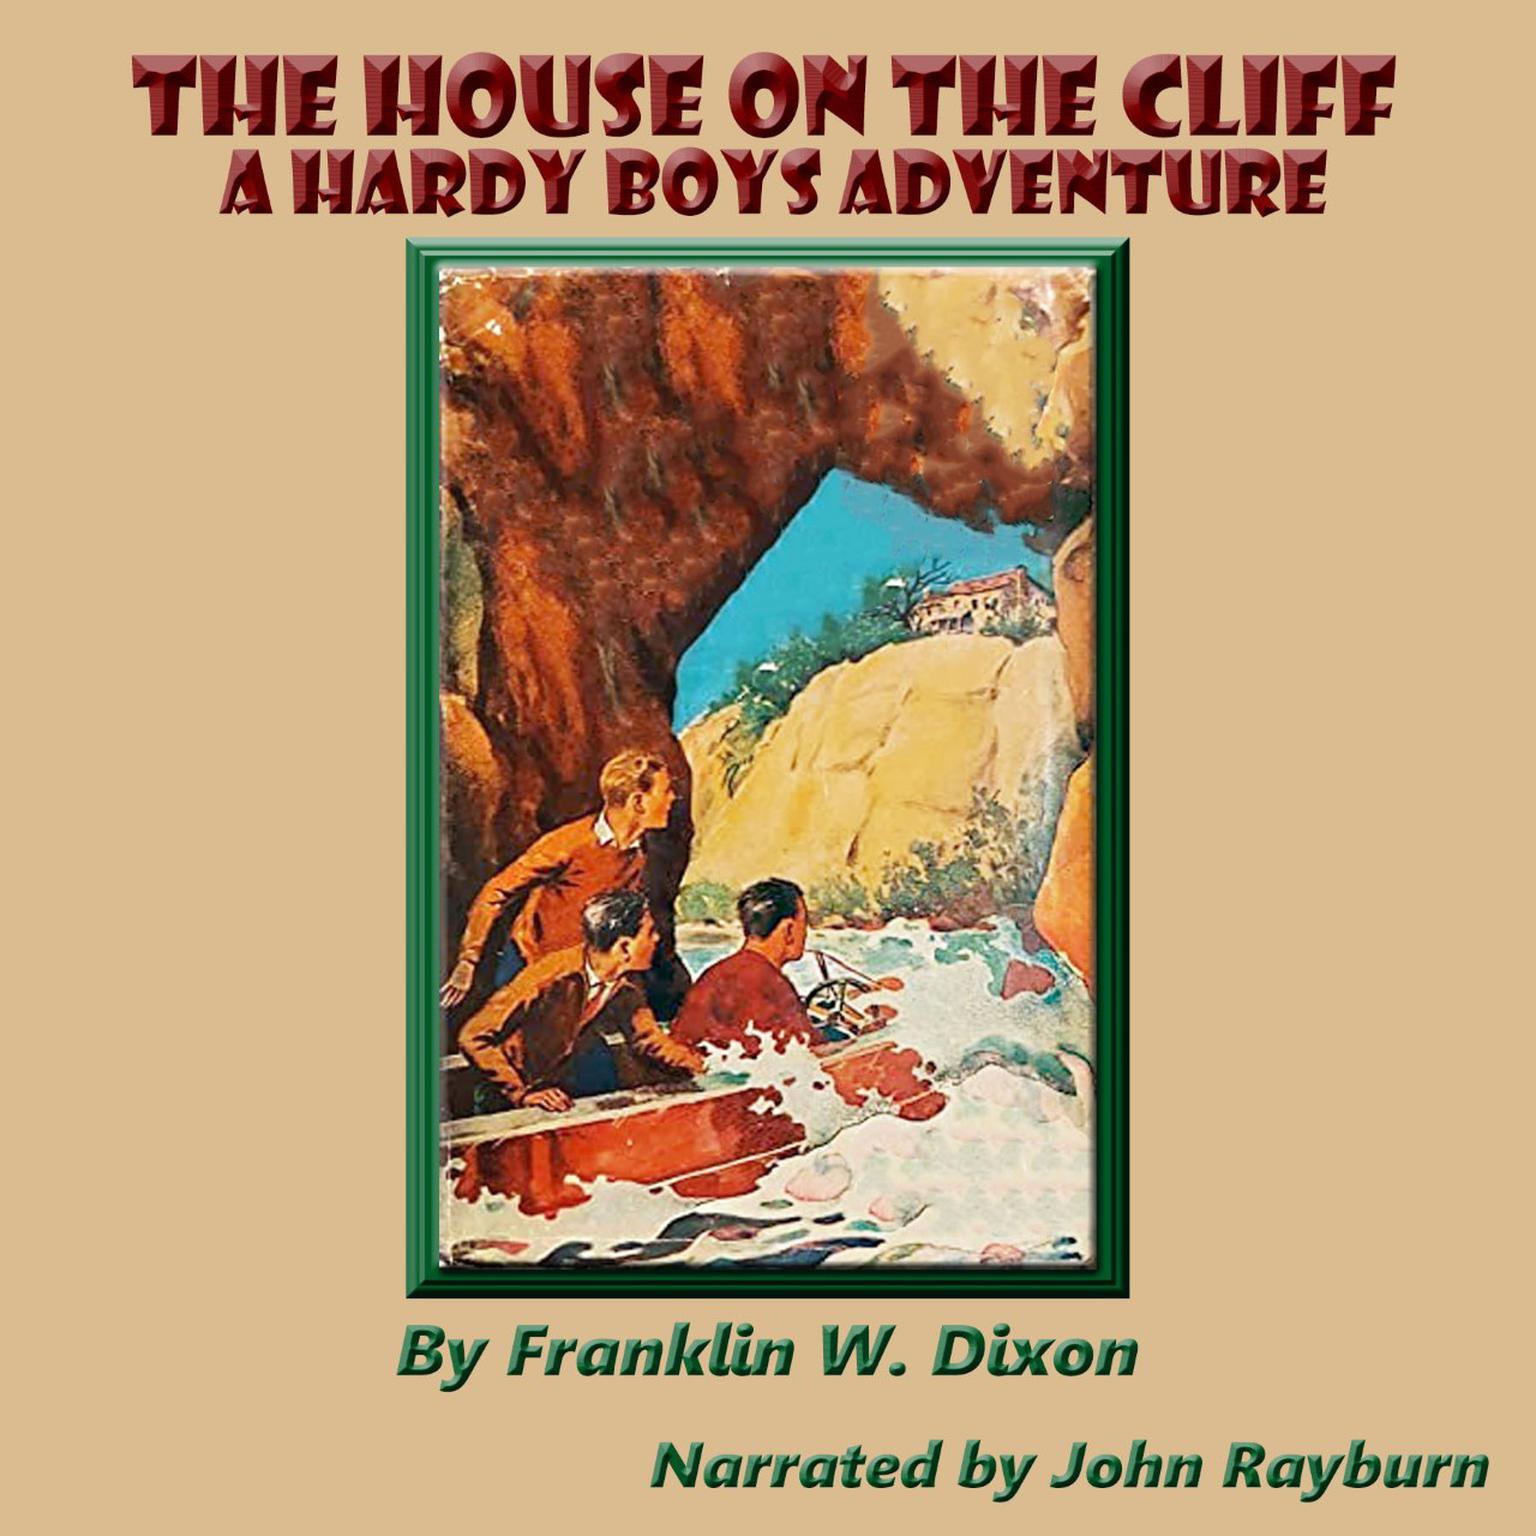 The House on the Cliff: A Hardy Boys Adventure Audiobook, by Franklin W. Dixon